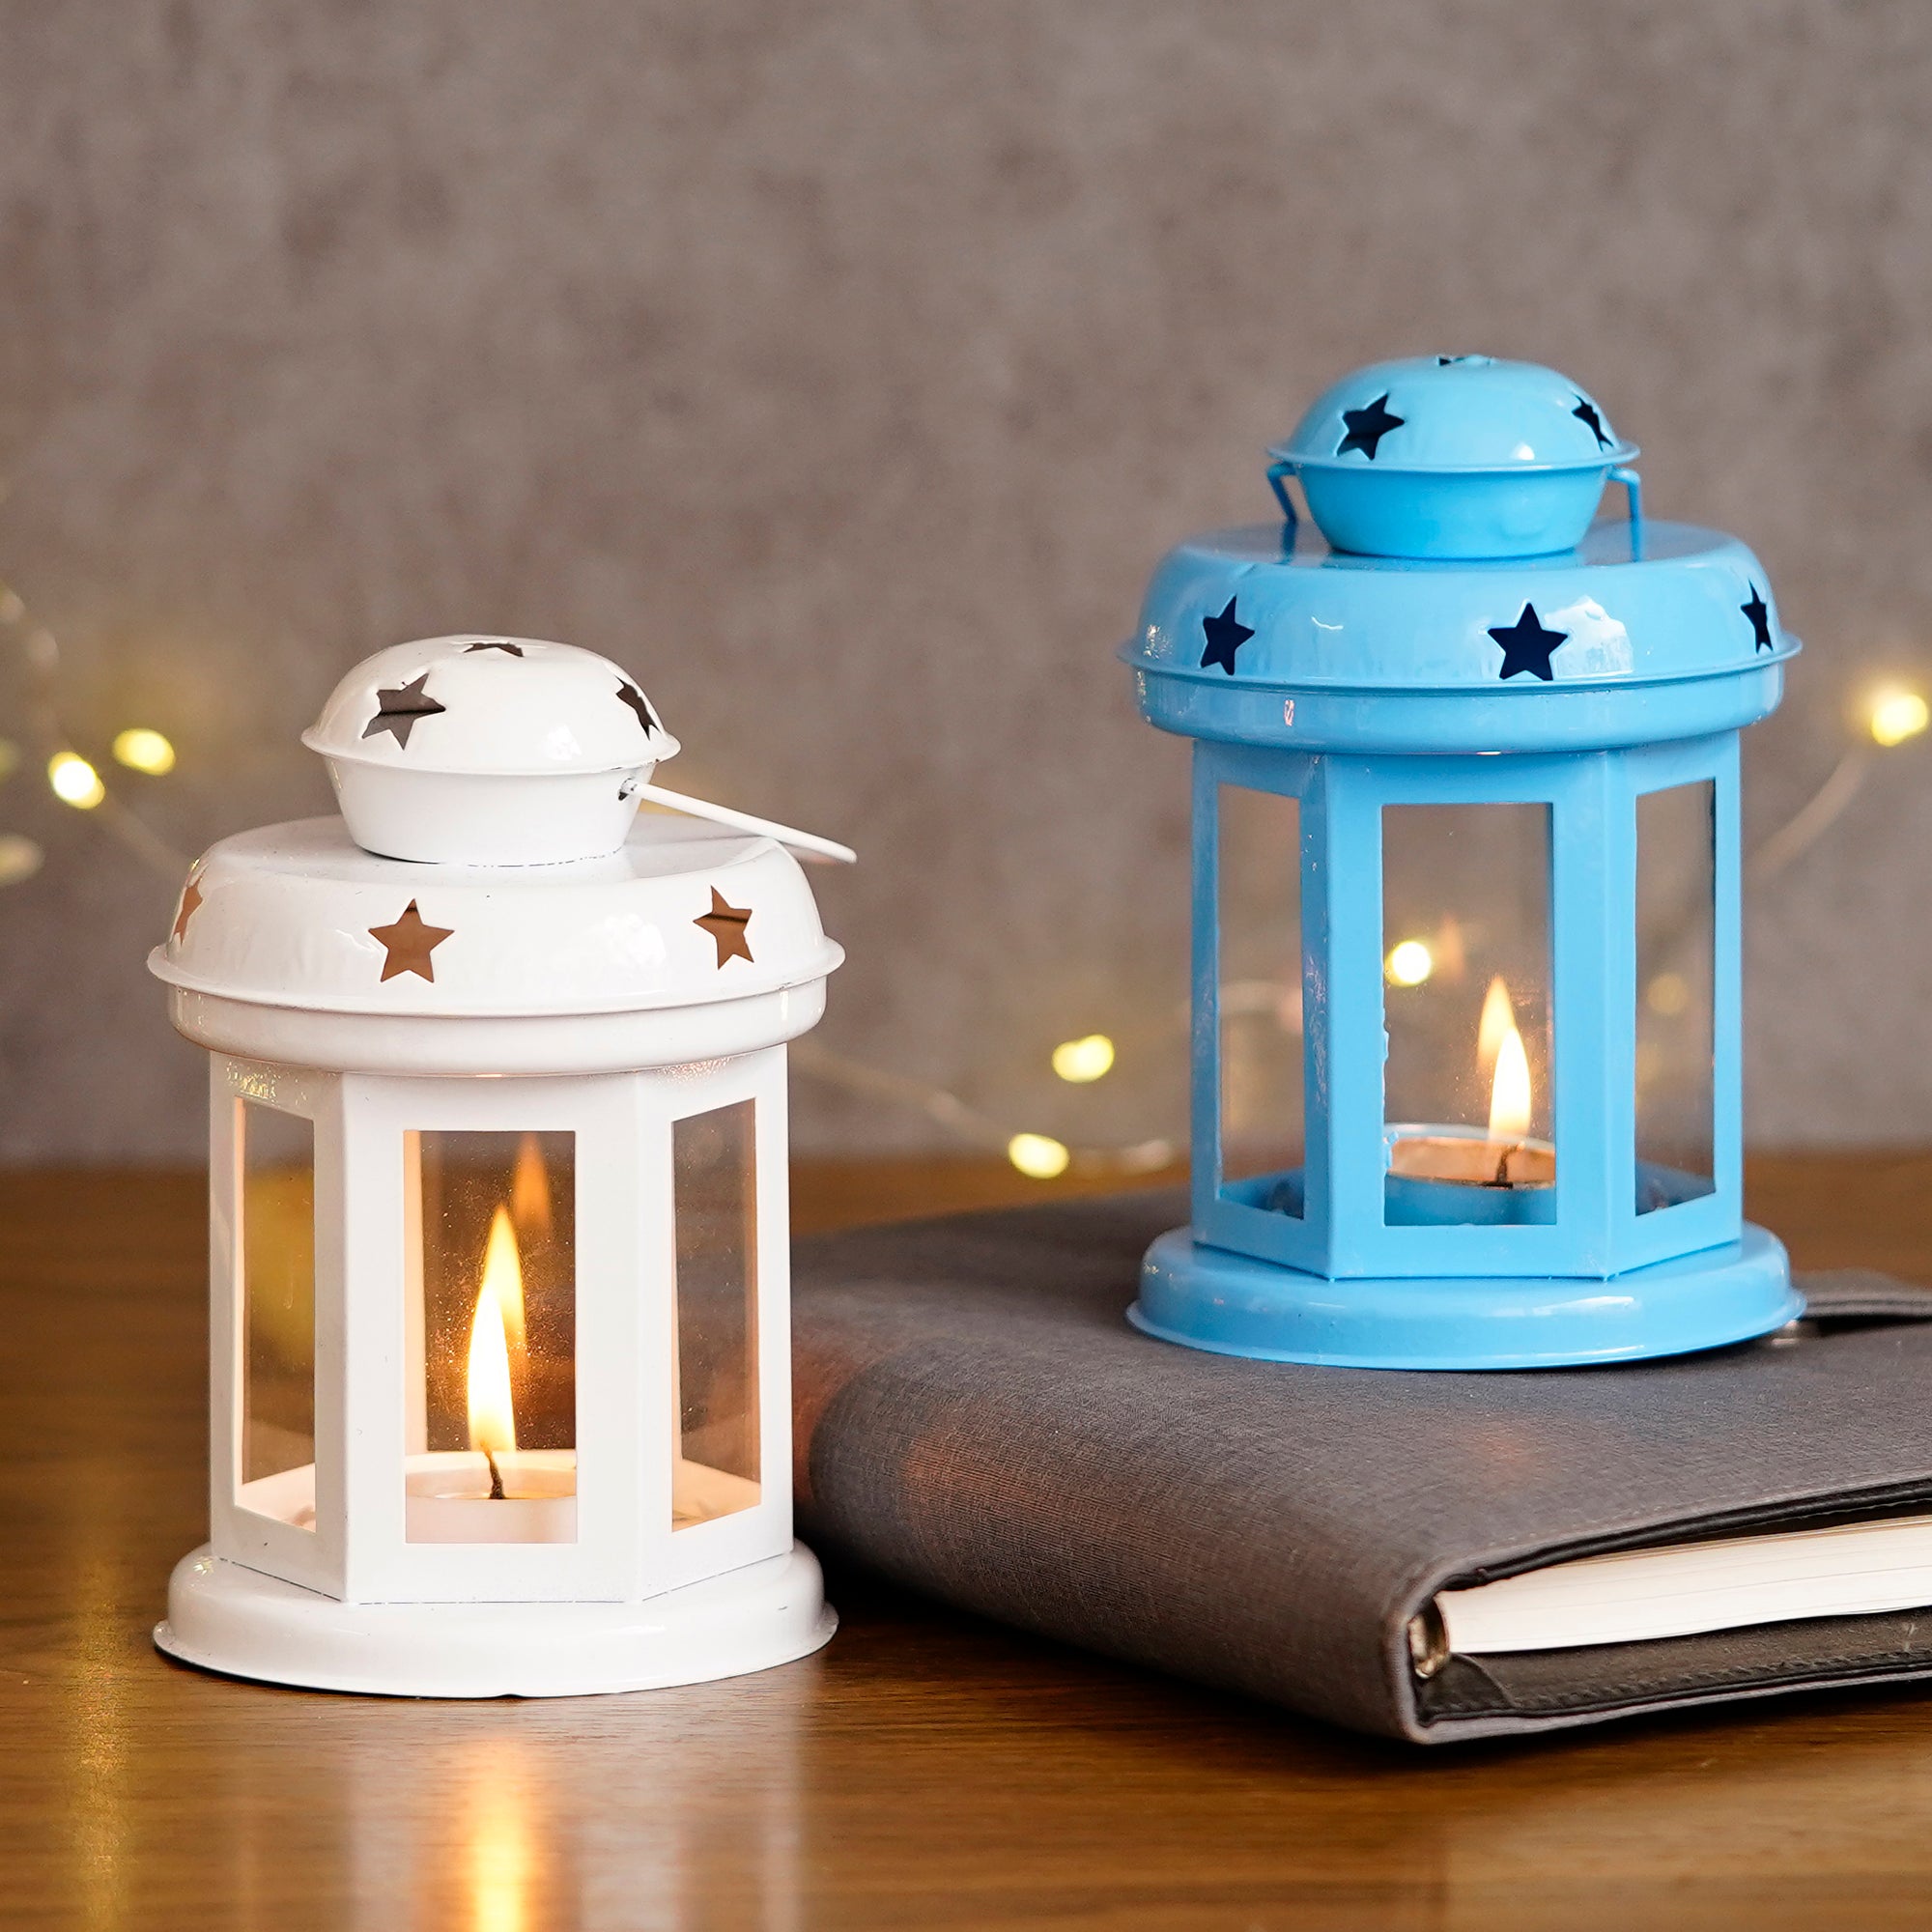 Set of 2 Blue and White Metal hanging Tea Light Candle Holder Lantern with Tealight Candle